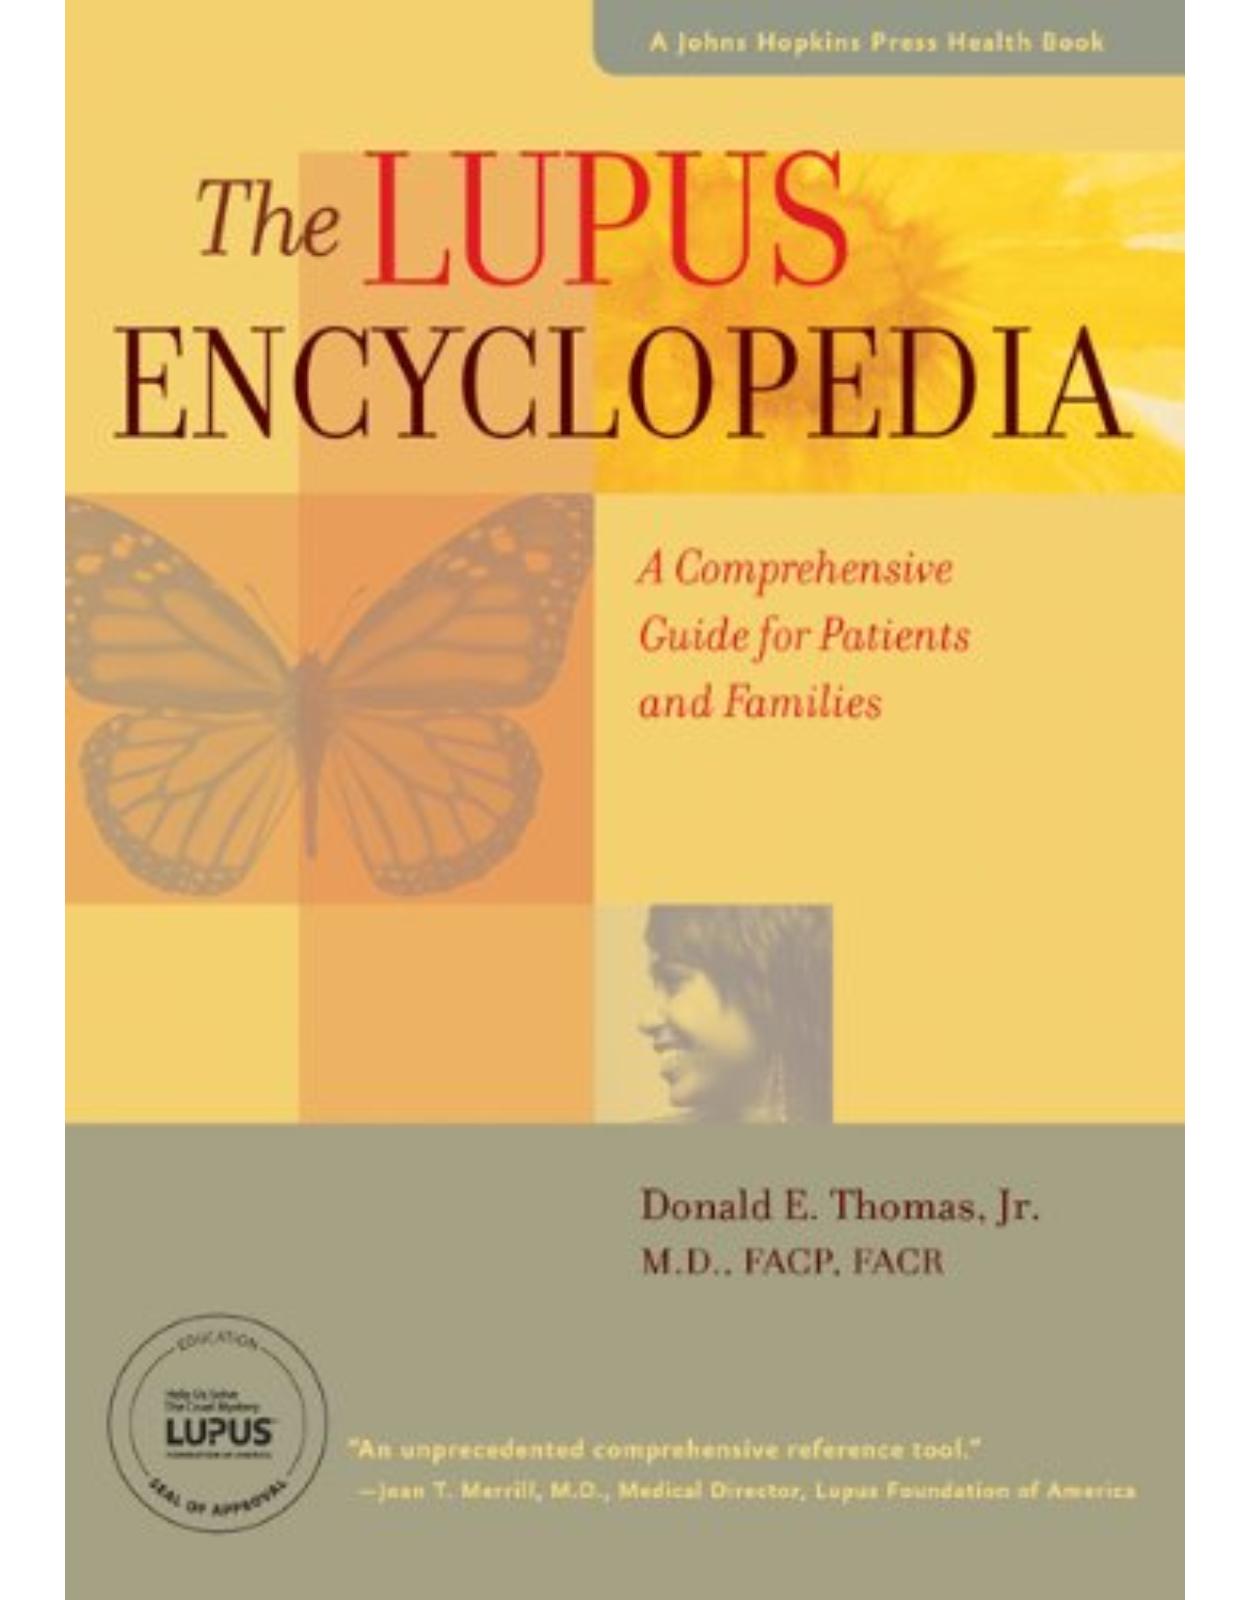 Lupus Encyclopedia, A Comprehensive Guide for Patients and Families